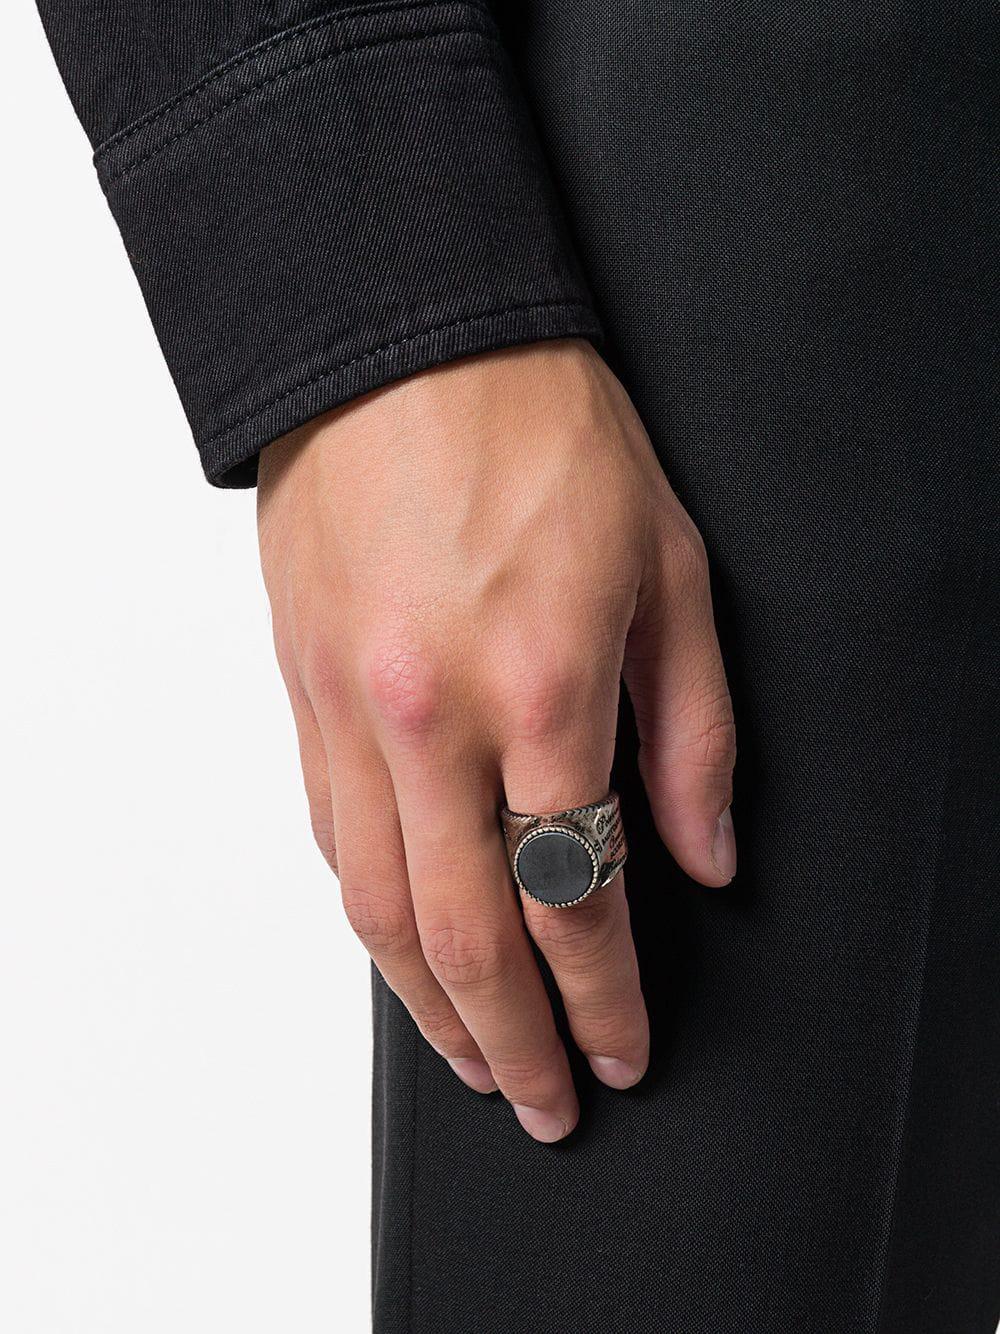 Givenchy Star Sign Ring in Metallic for Men - Lyst